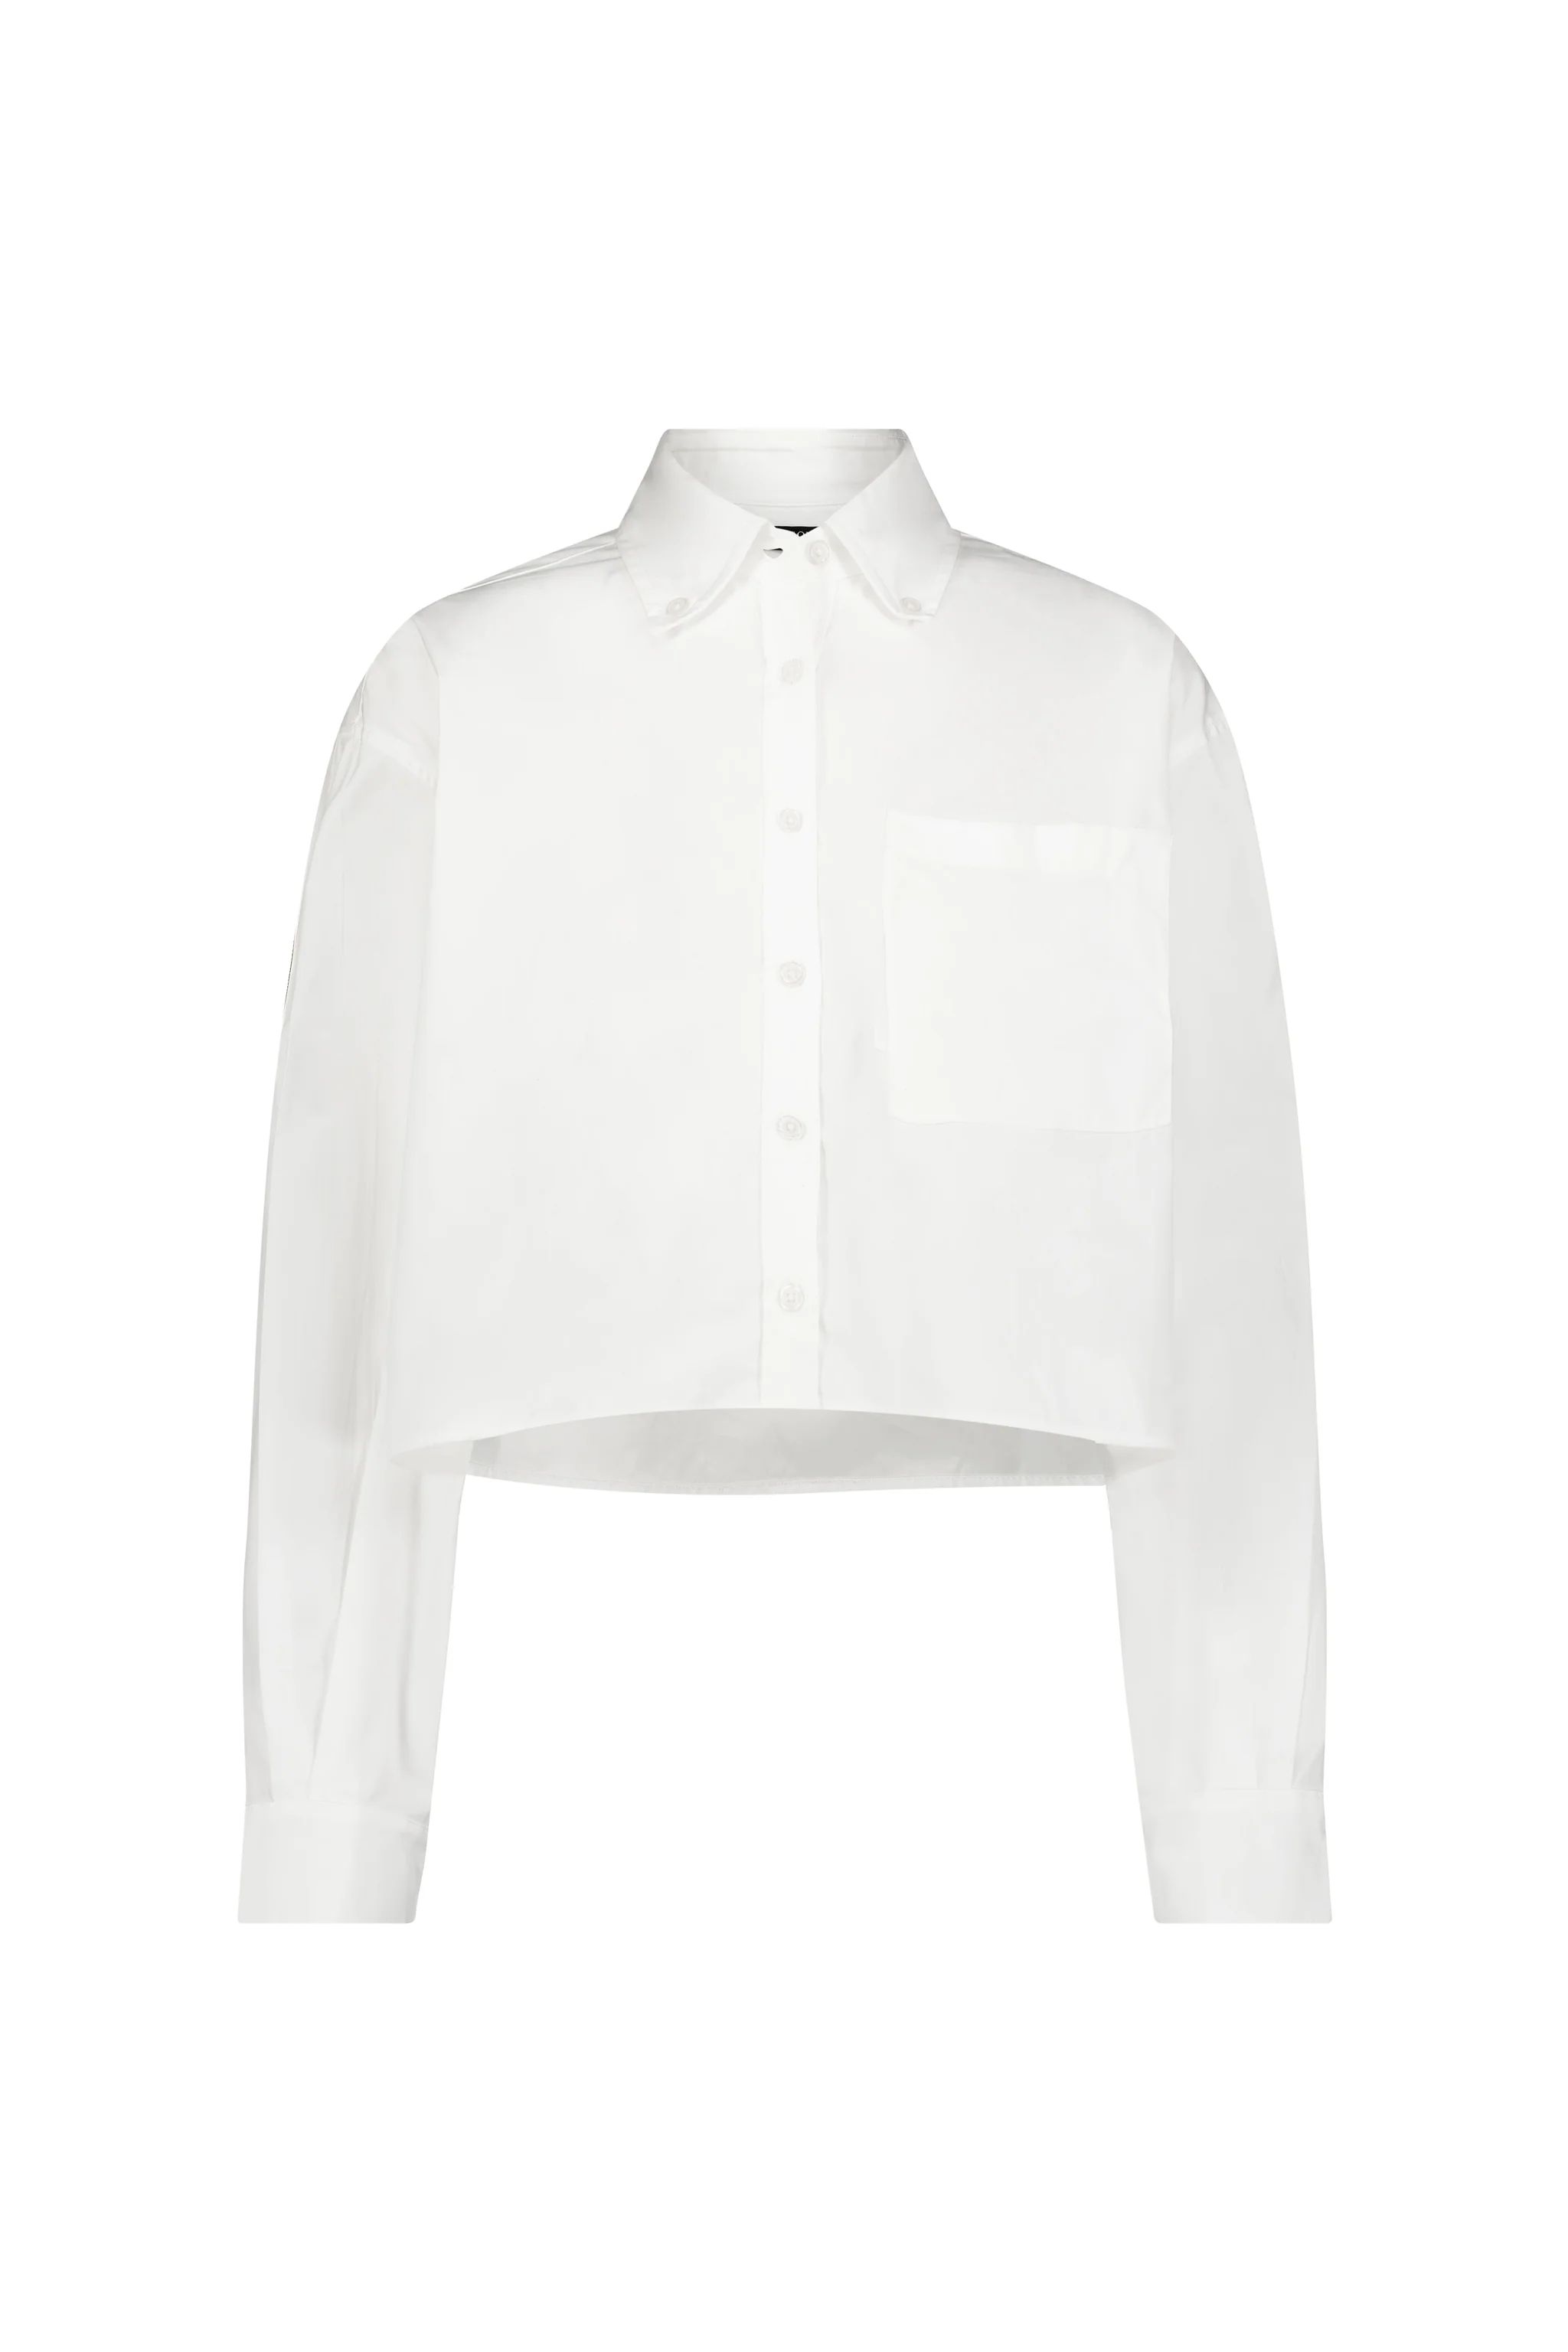 Cropped White Button-Down Shirt | MAYSON the label